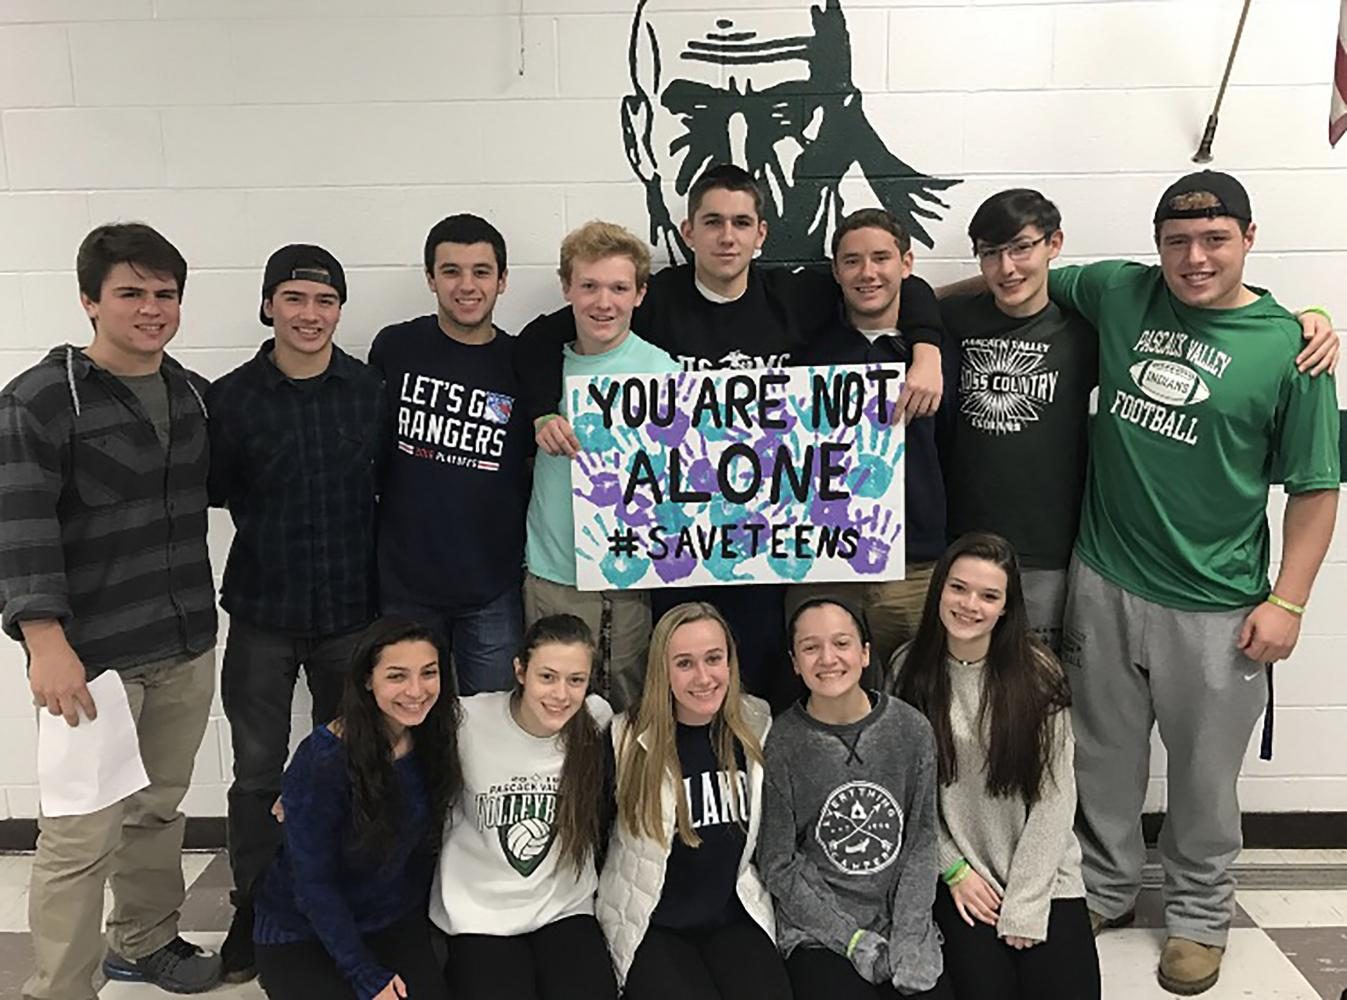 PV+Seniors+and+friends+of+Jack+Farrell+got+together+to+promote+suicide+awareness.+